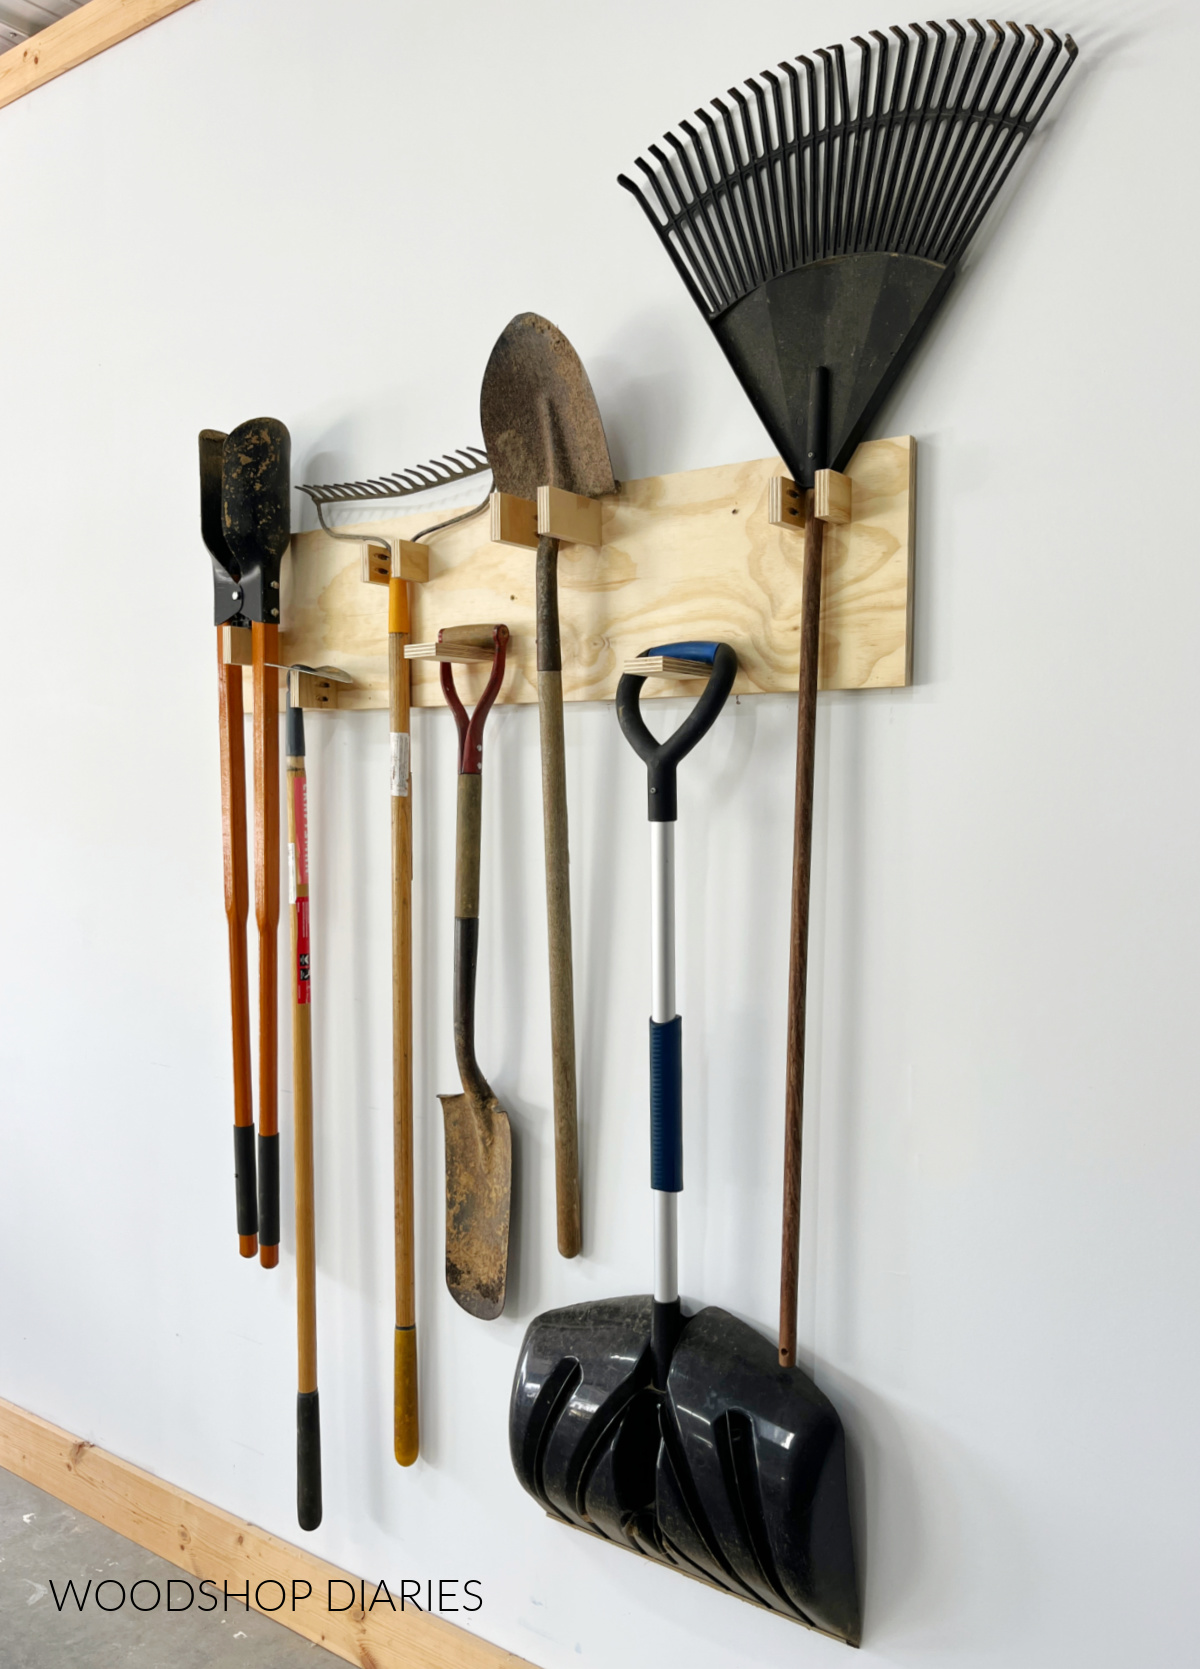 Completed yard tool organizer with shovels and rakes hanging on it against white wall